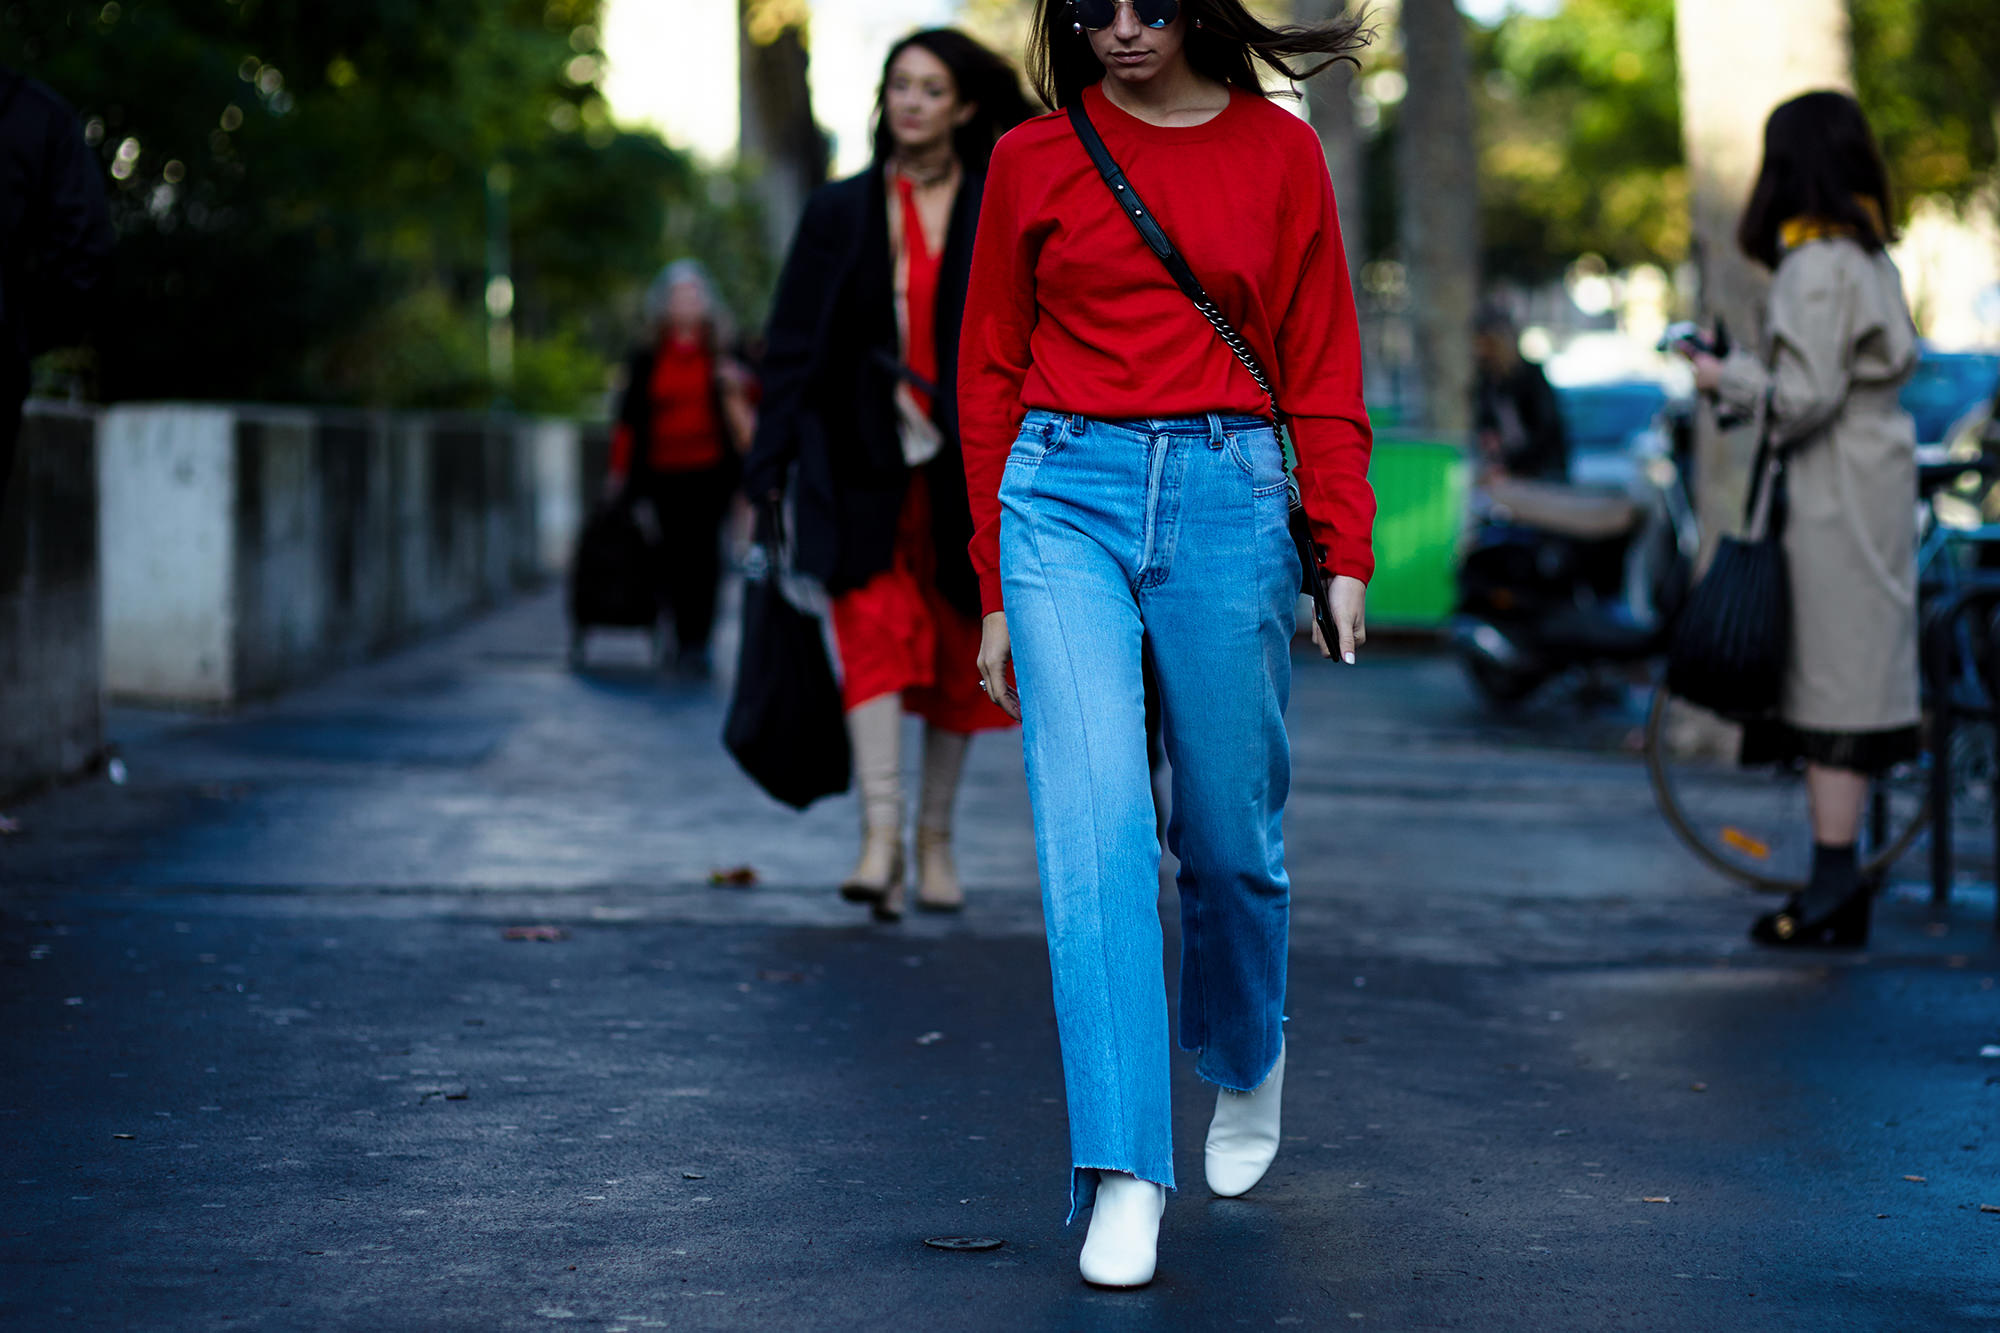 PFW Spring-Summer 2017 street style: Amanda Alagem wearing a red sweater, Vetements jeans and white ankle boots before a show in Paris, France